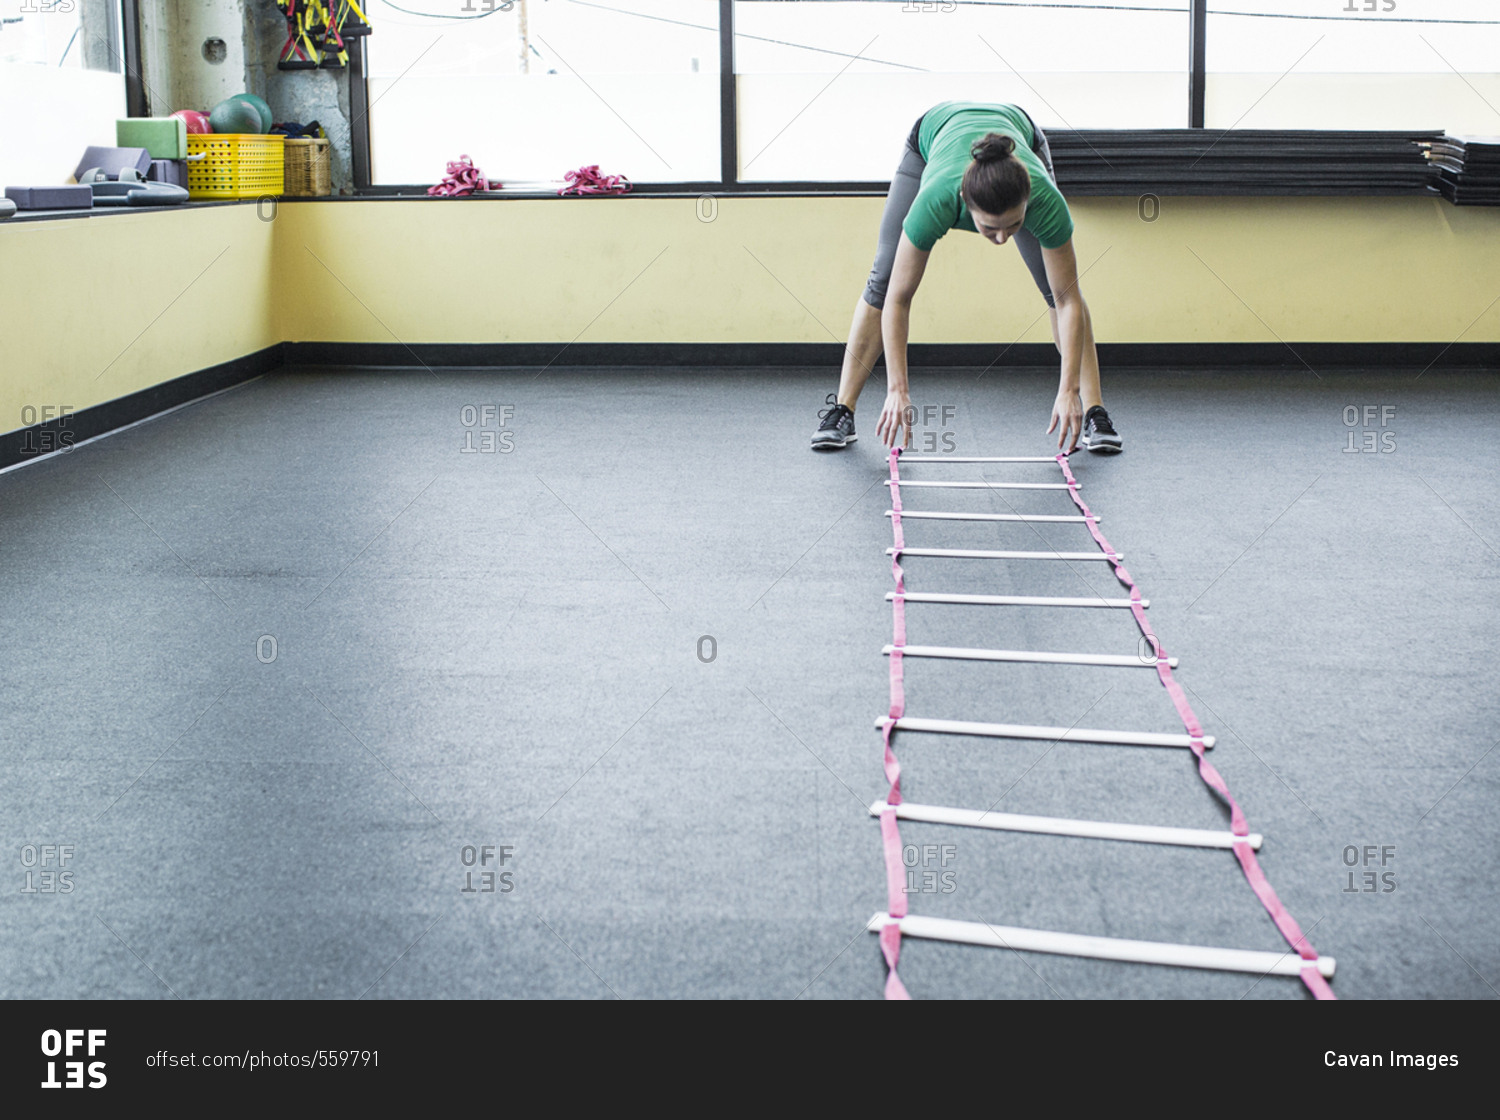 Instructor placing agility ladder on floor in gym